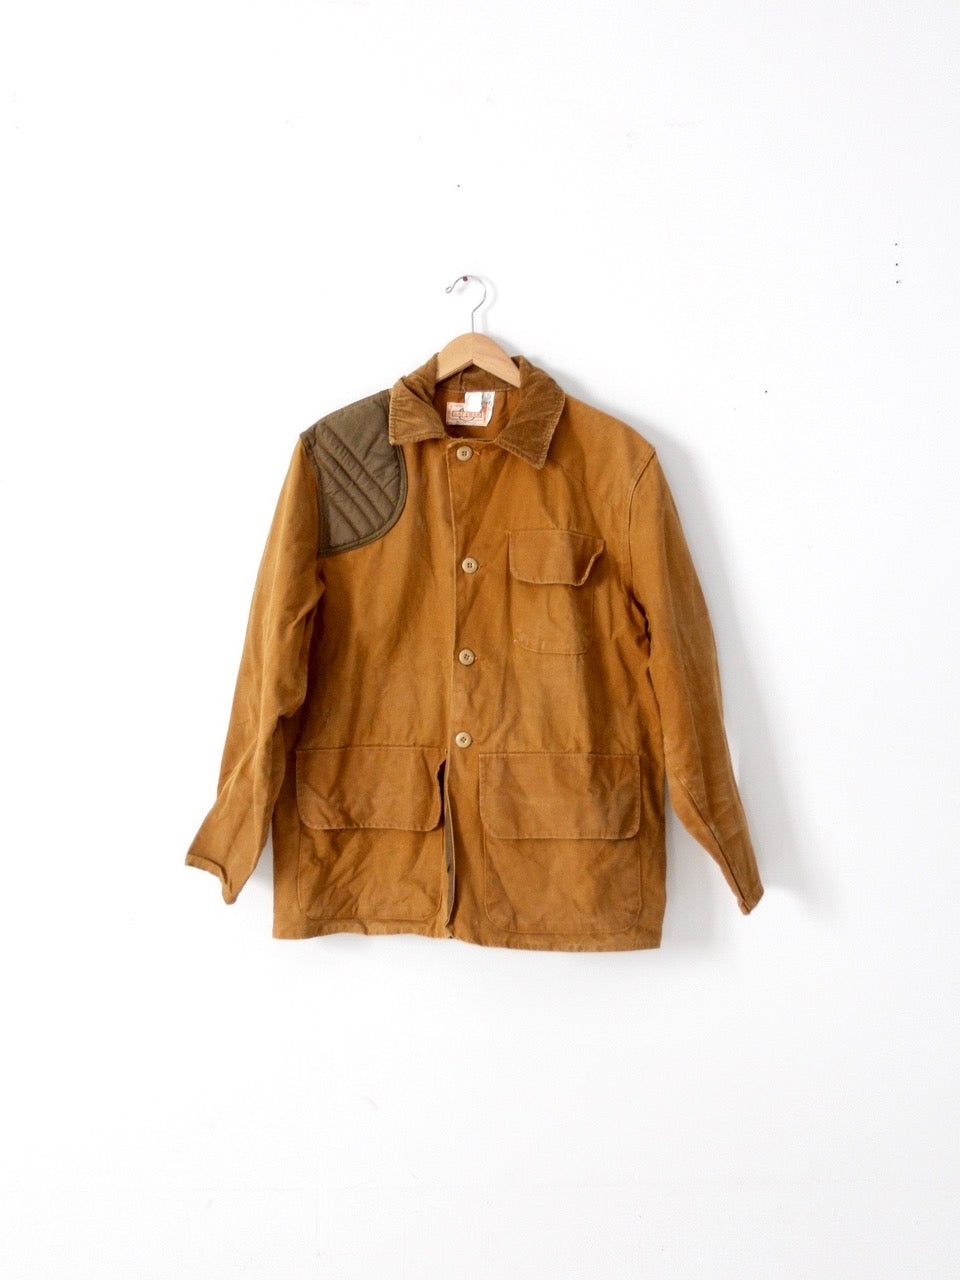 Vintage Remake French Hunting Jacket/1950's/ Made in 